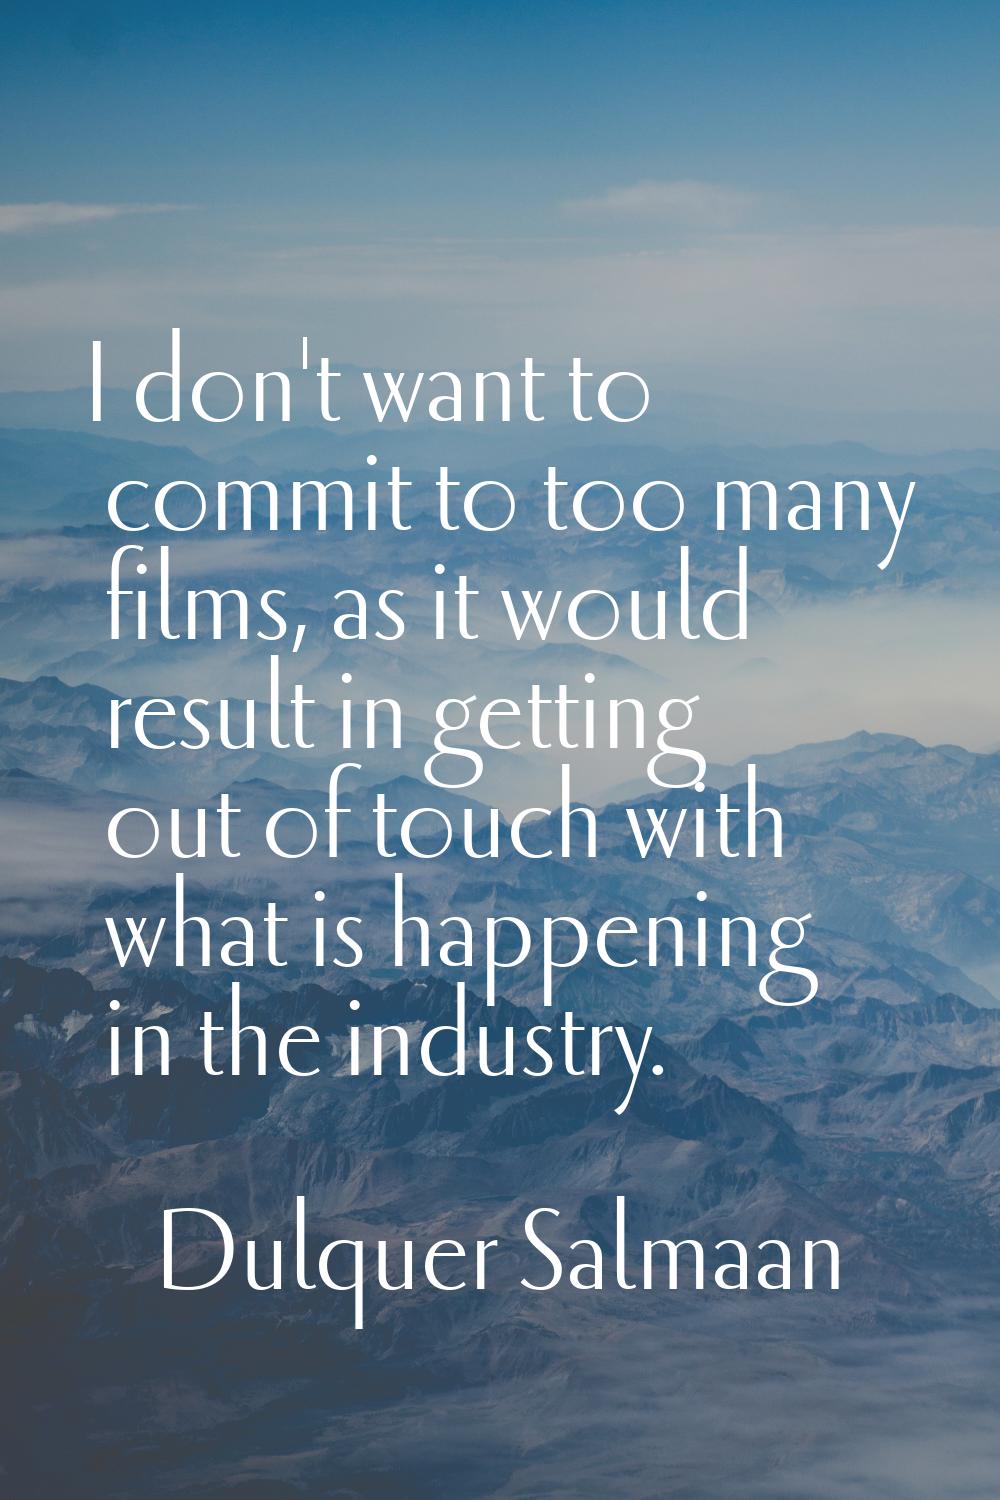 I don't want to commit to too many films, as it would result in getting out of touch with what is h